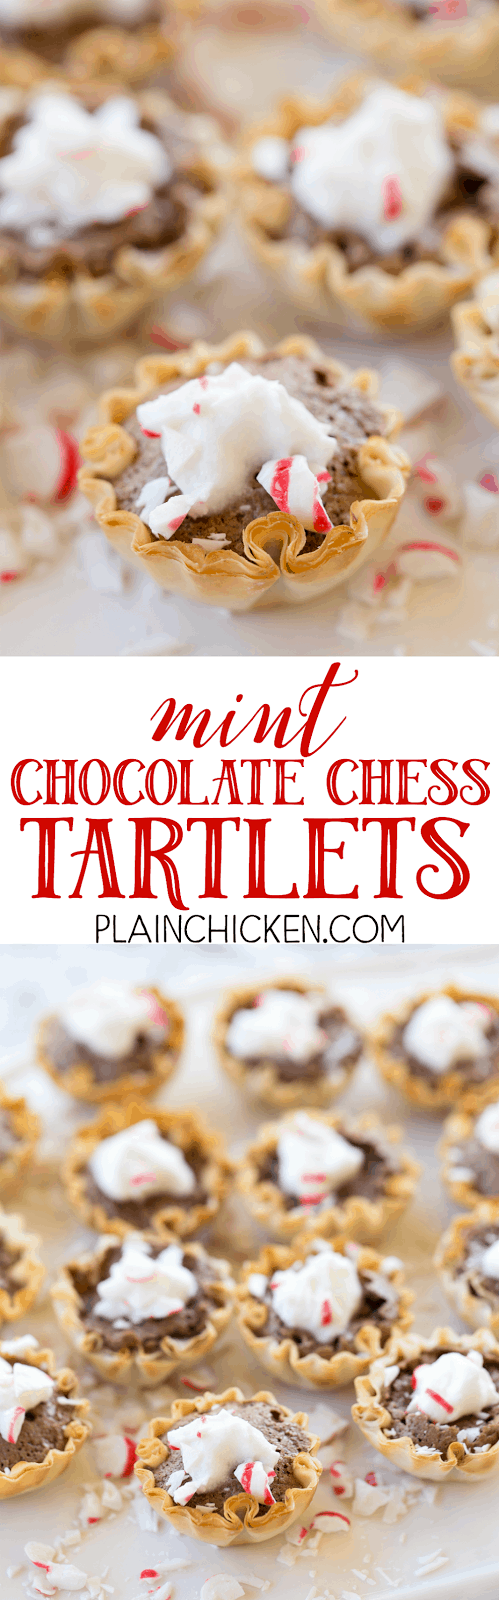 Mint Chocolate Chess Tartlets - tastes like Christmas! SO easy and makes a ton. GREAT for parties! Can make ahead of time and store in airtight container. Sugar, cocoa powder, cornmeal, flour, vinegar, butter, eggs, mint, mini phyllo tarts. Top the tarts with whipped cream and crushed mints. Everyone RAVED about how great these were. YUM!